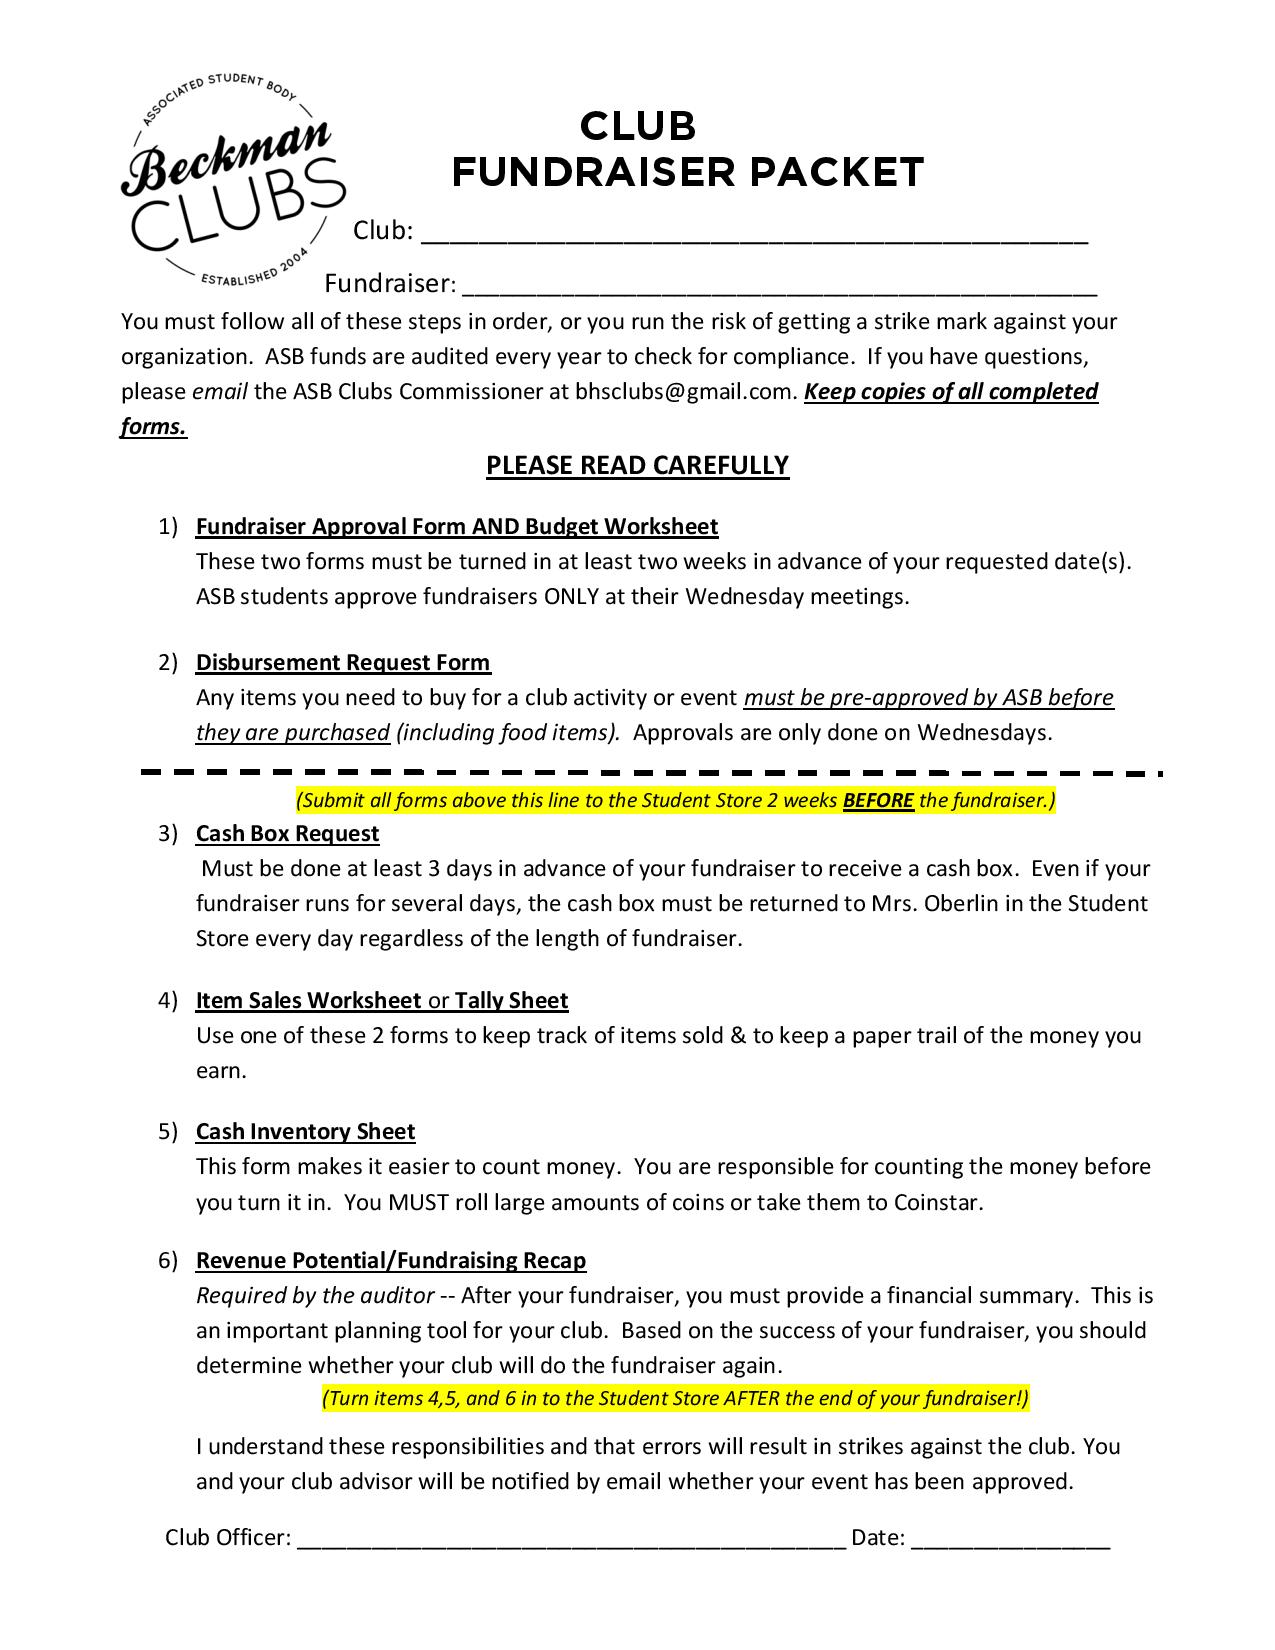 ClubsFundraiserPacket-page-001.jpg